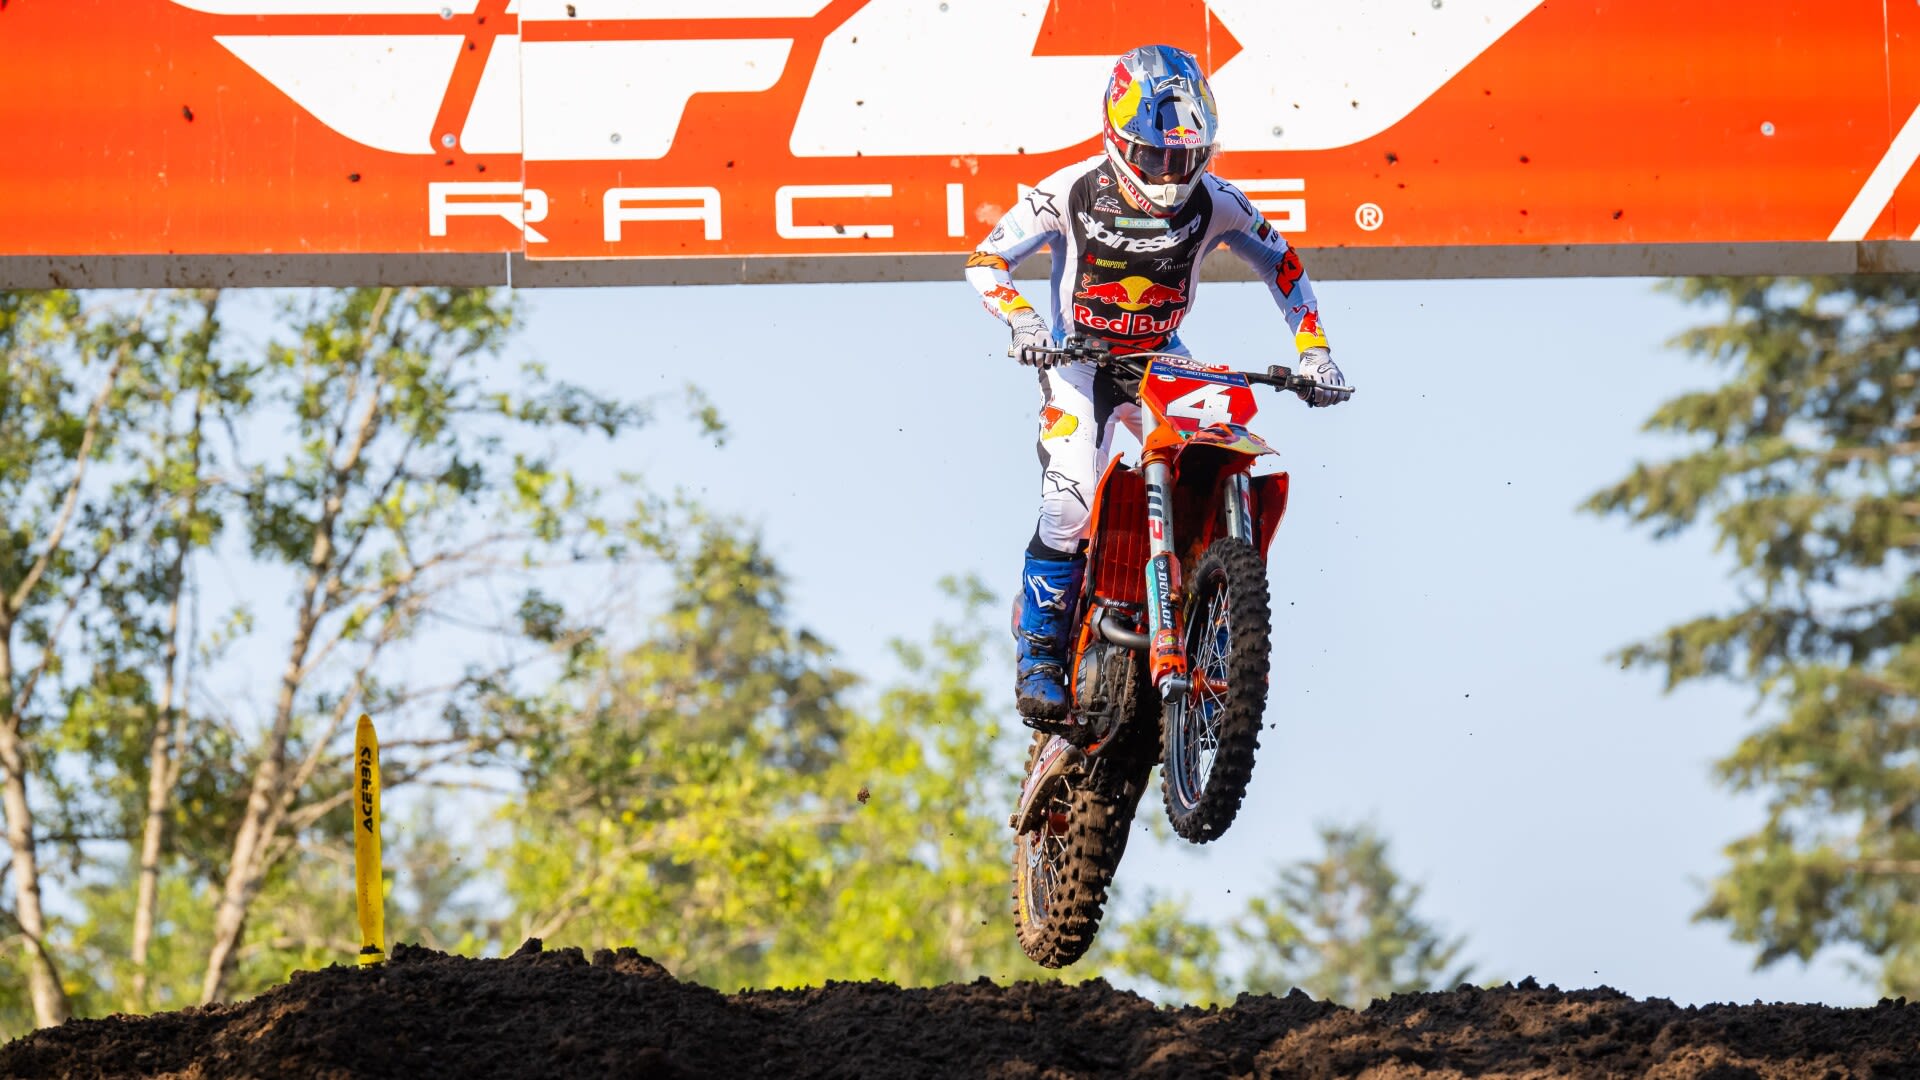 Chase Sexton wins third consecutive Pro Motocross overall at Washougal, pads points lead